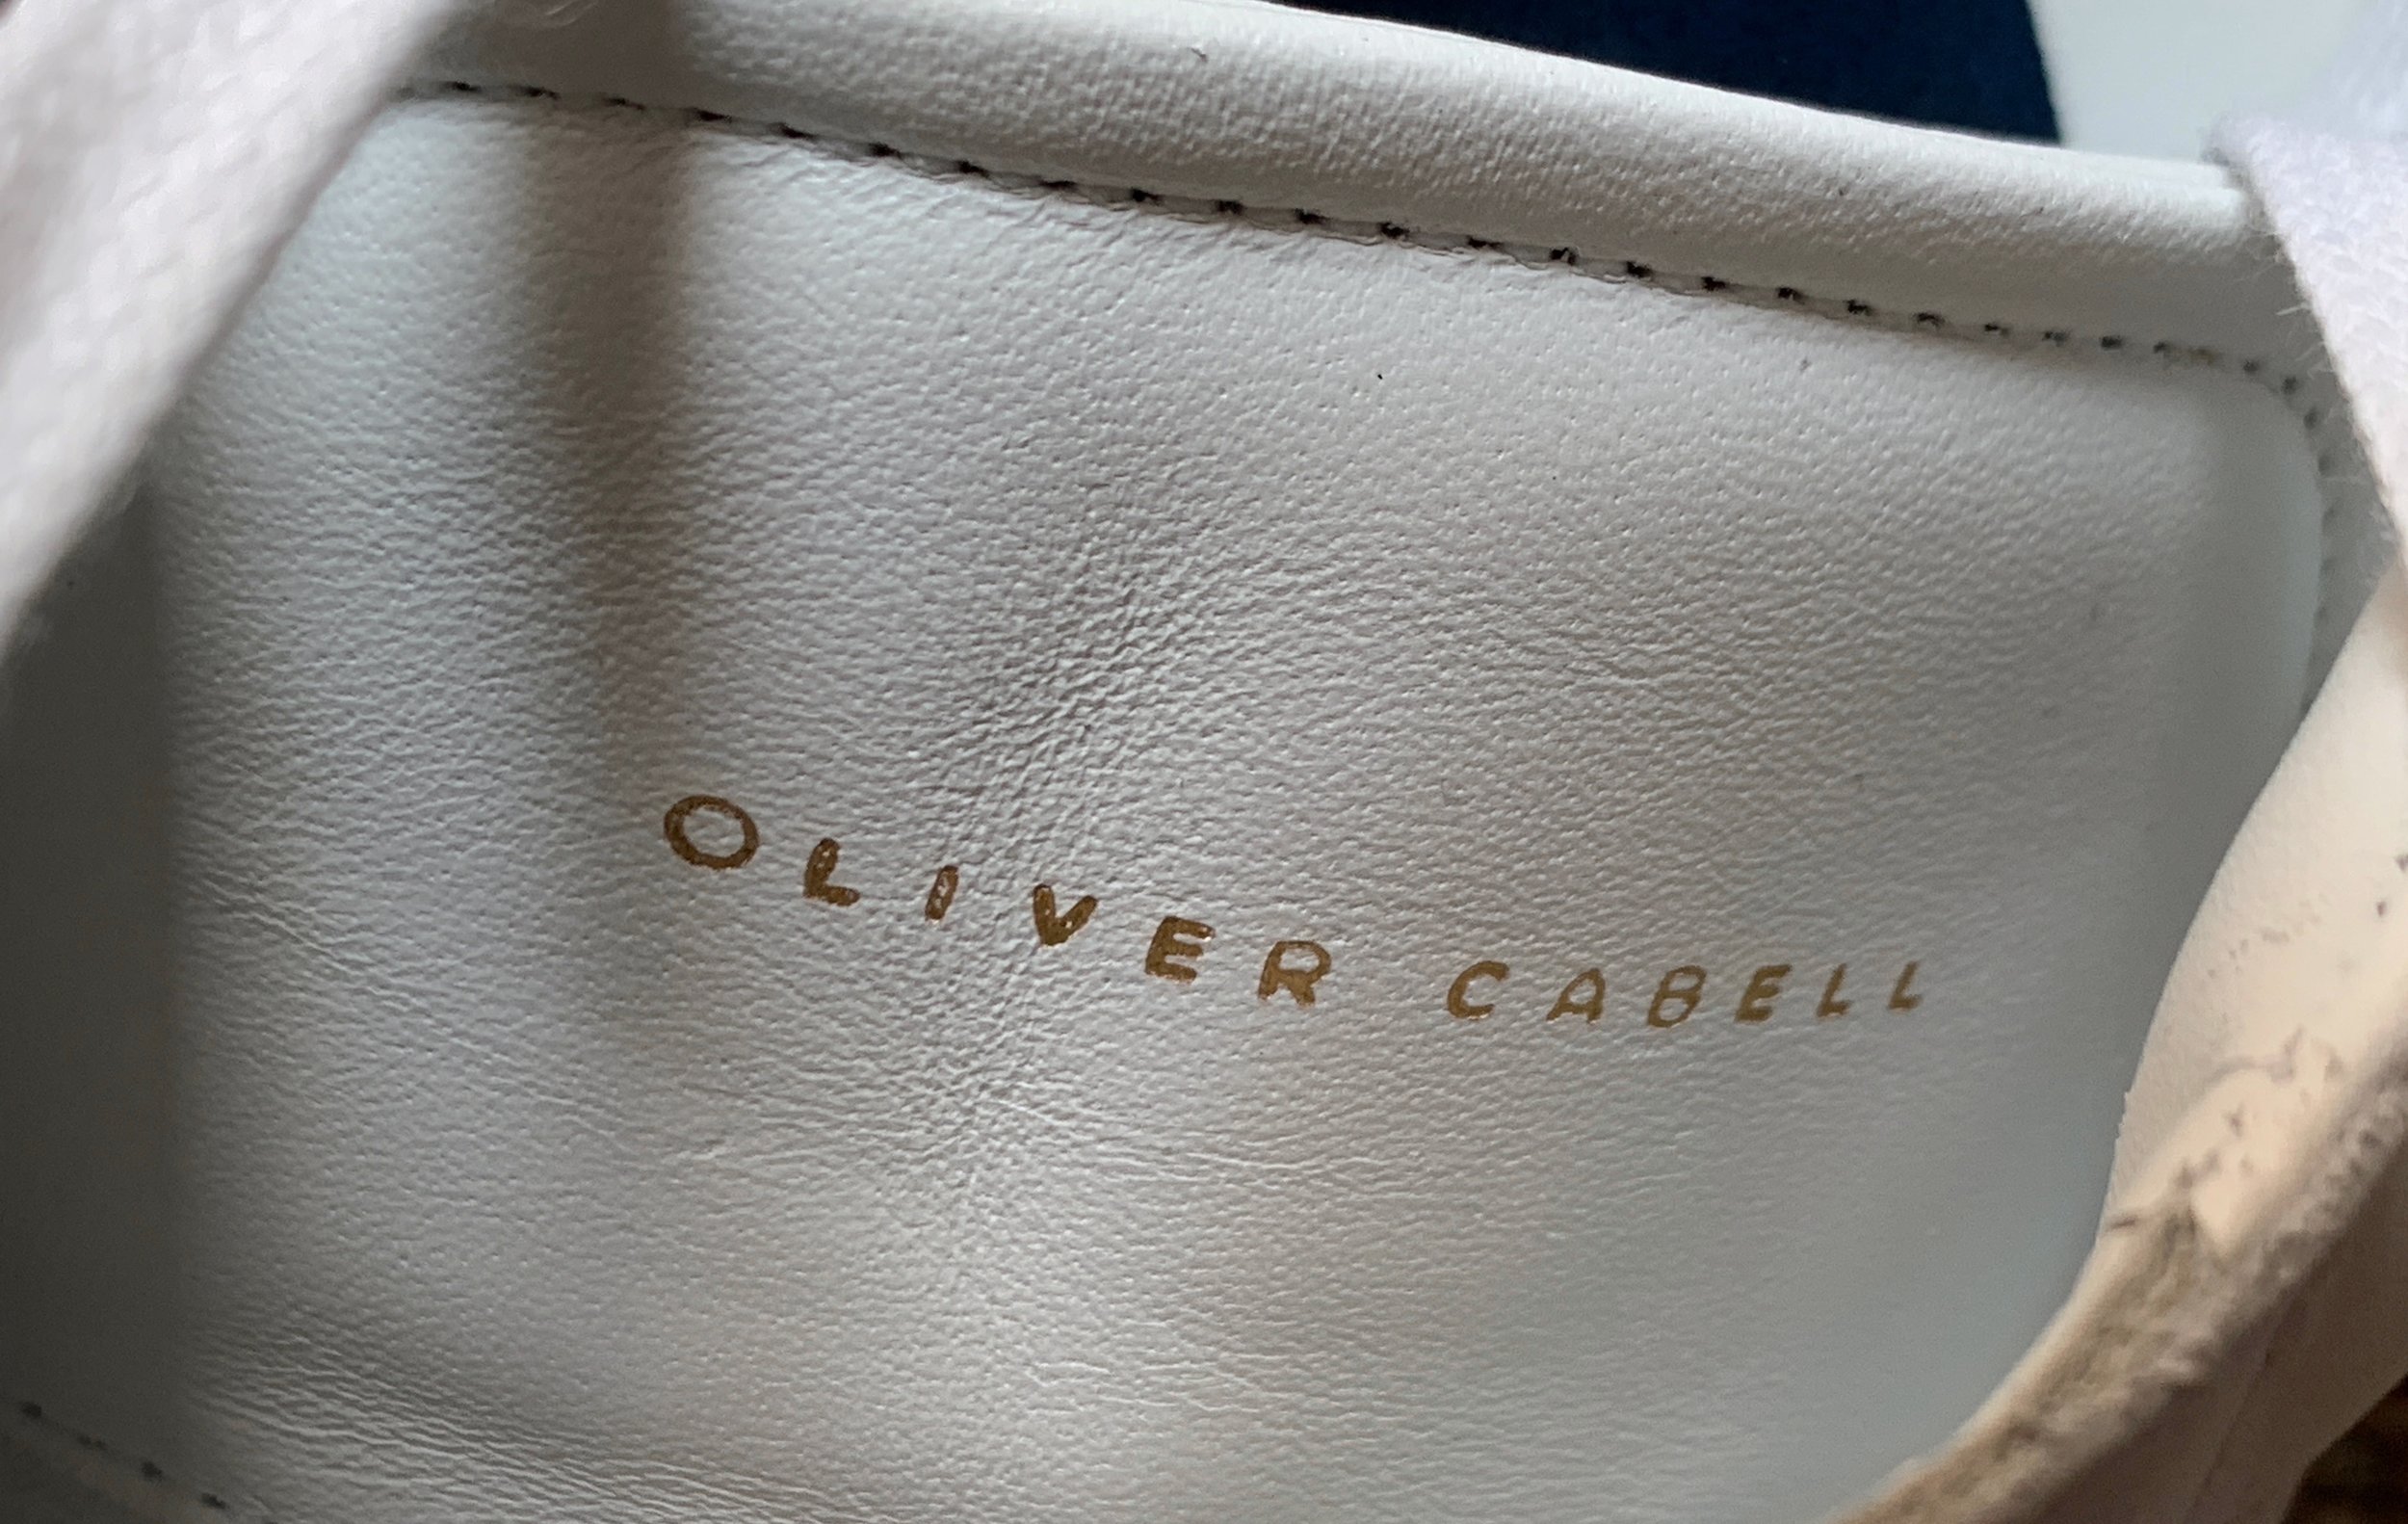 Looking For A Great White Leather Sneaker? Look No Further Than Oliver ...